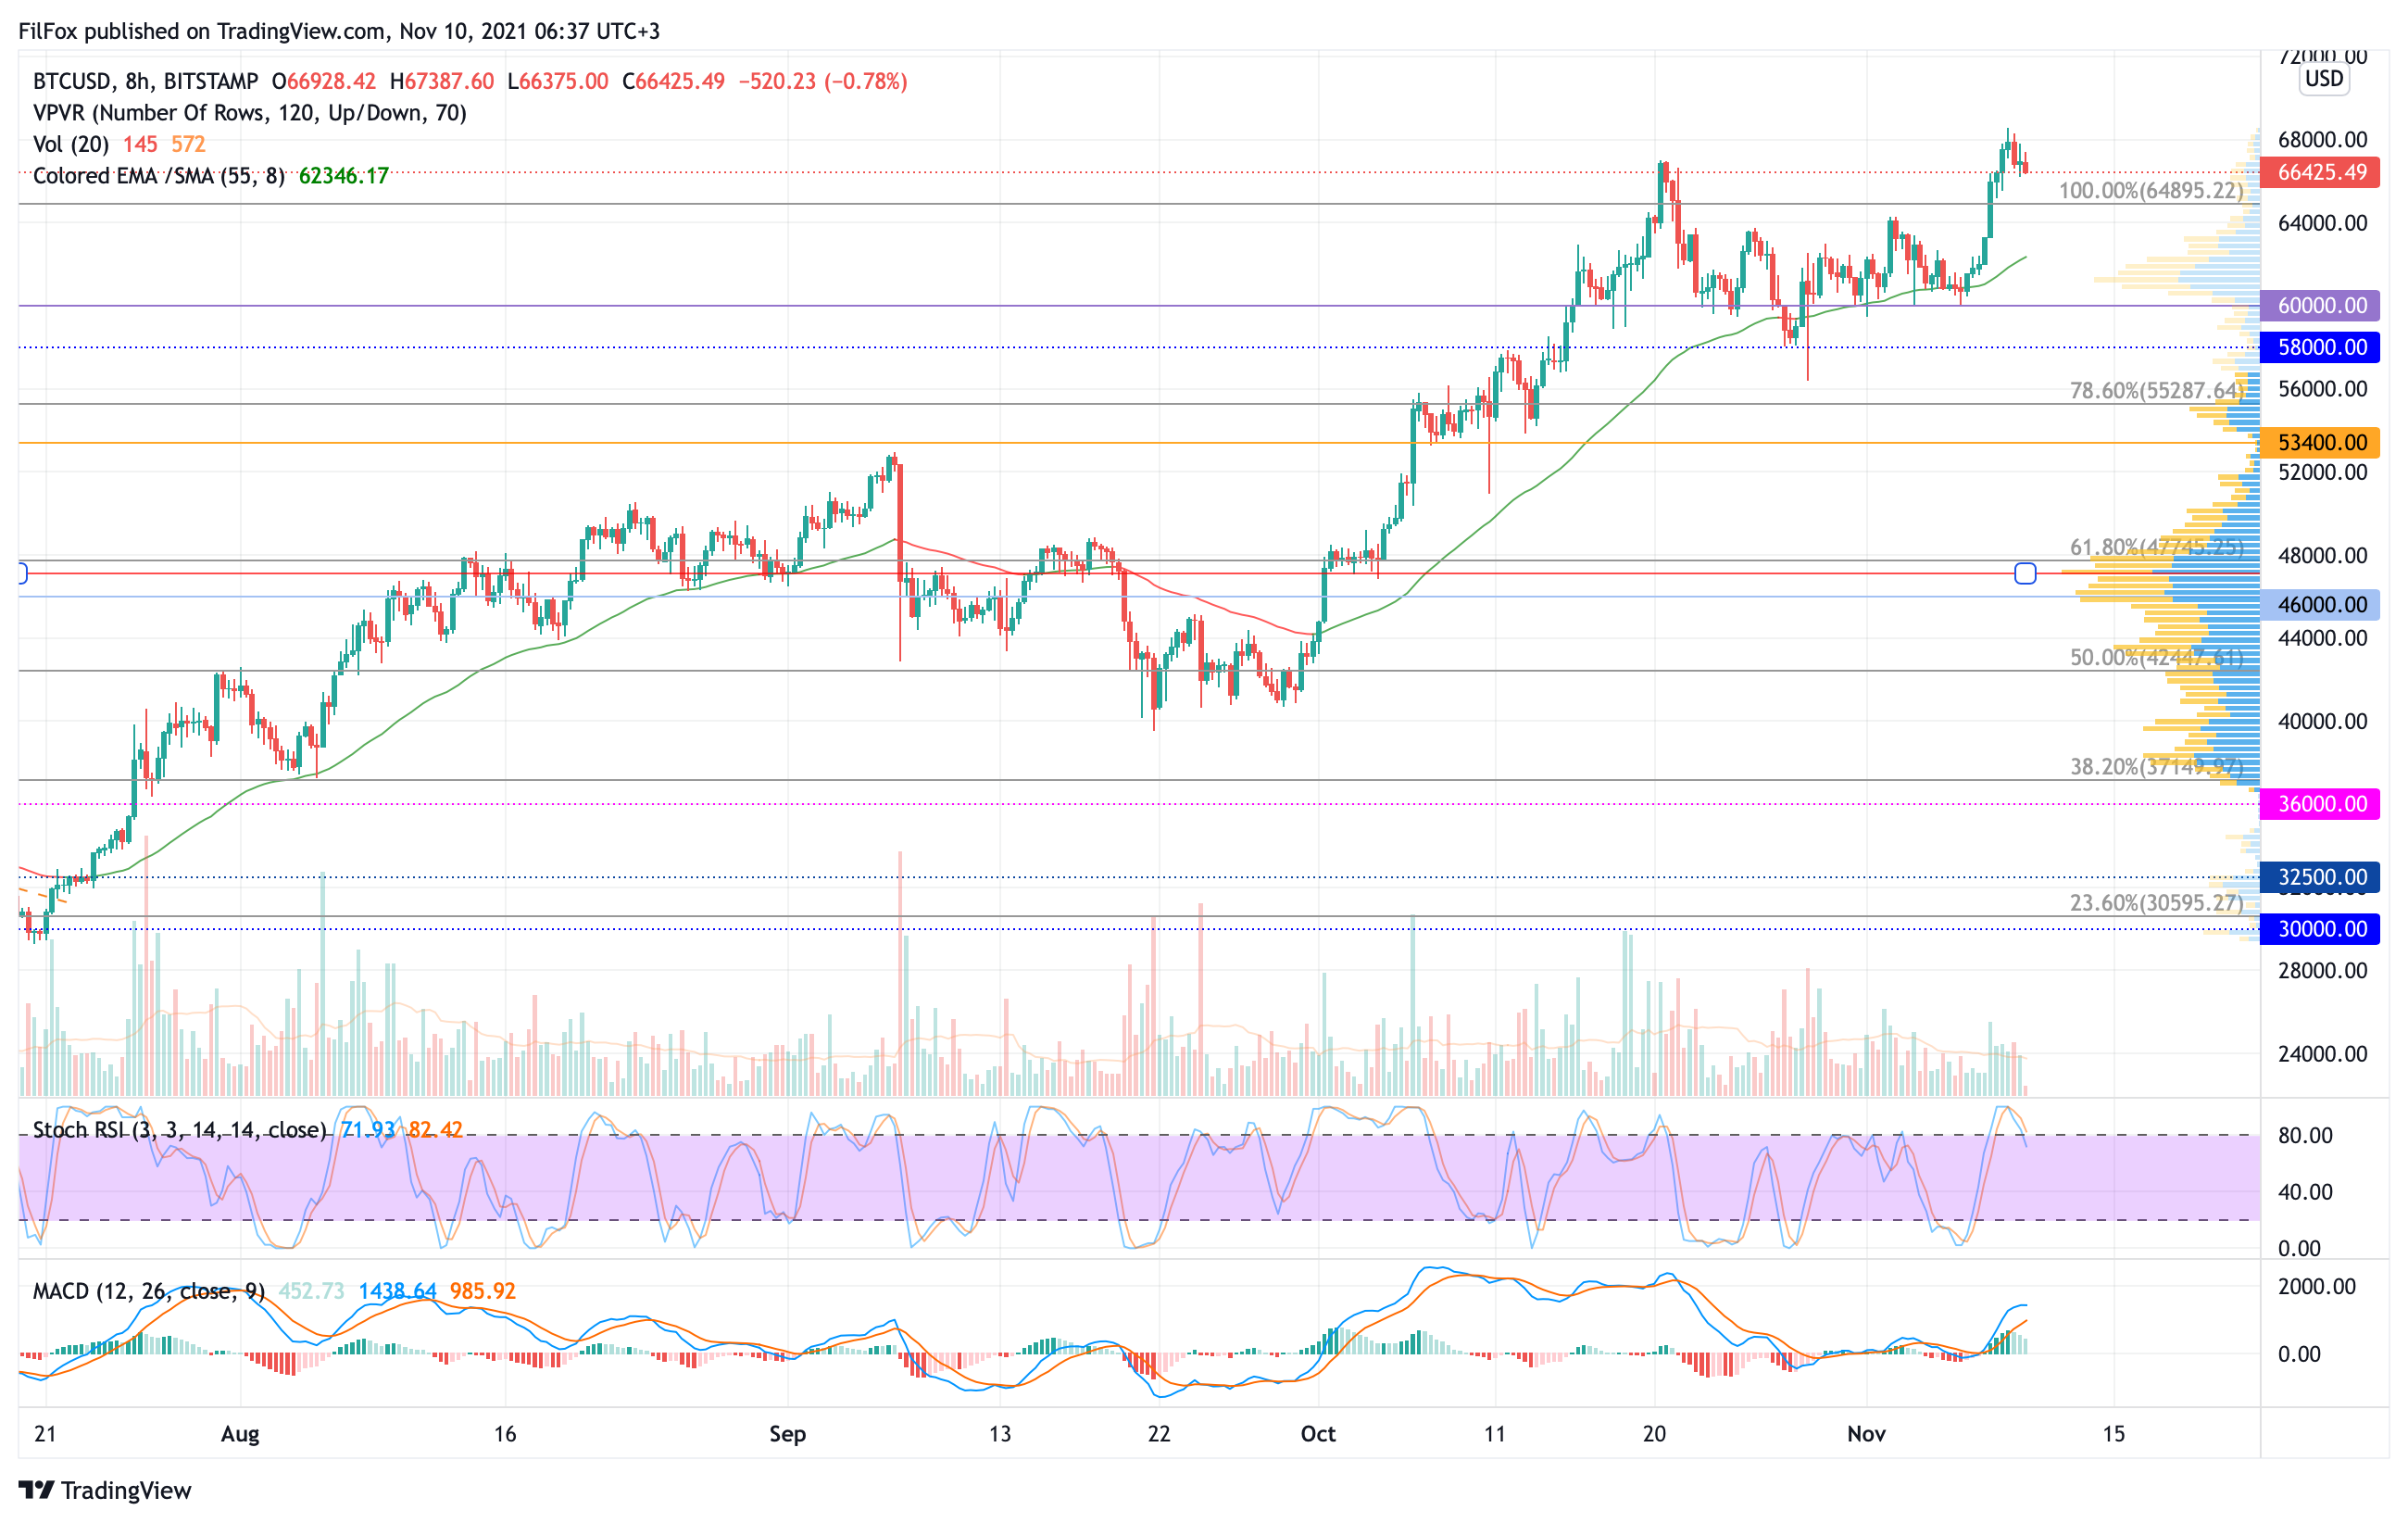 Analysis of the prices of Bitcoin, Ethereum, XRP for 11/10/2021